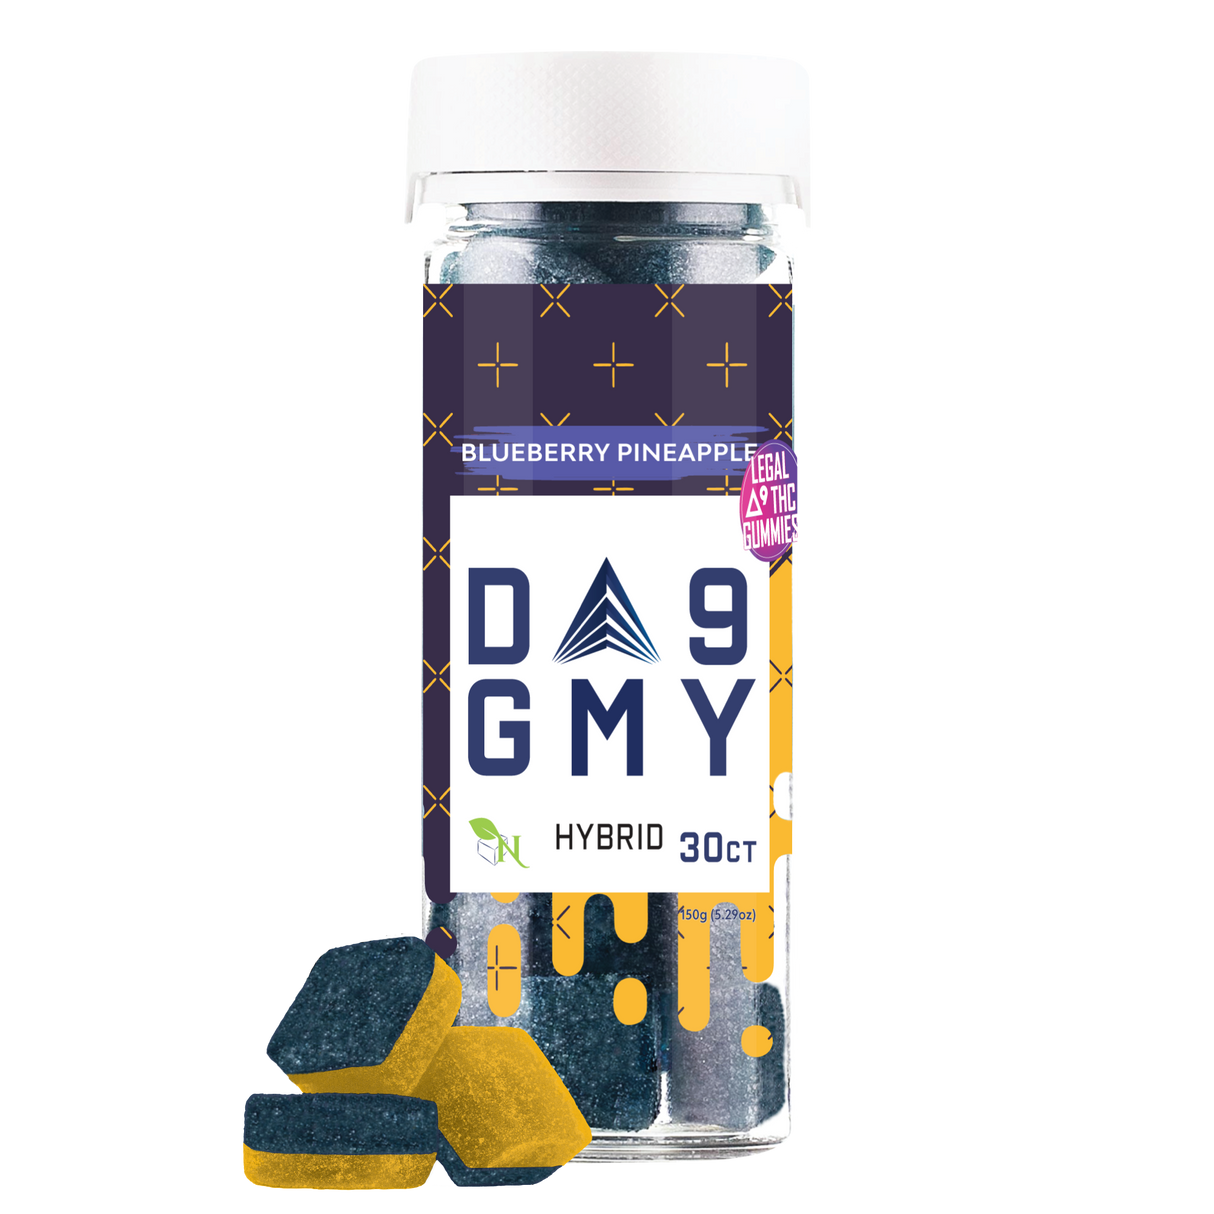 A Gift From Nature Delta-9 Hybrid Gummy Jar: Blueberry Pineapple